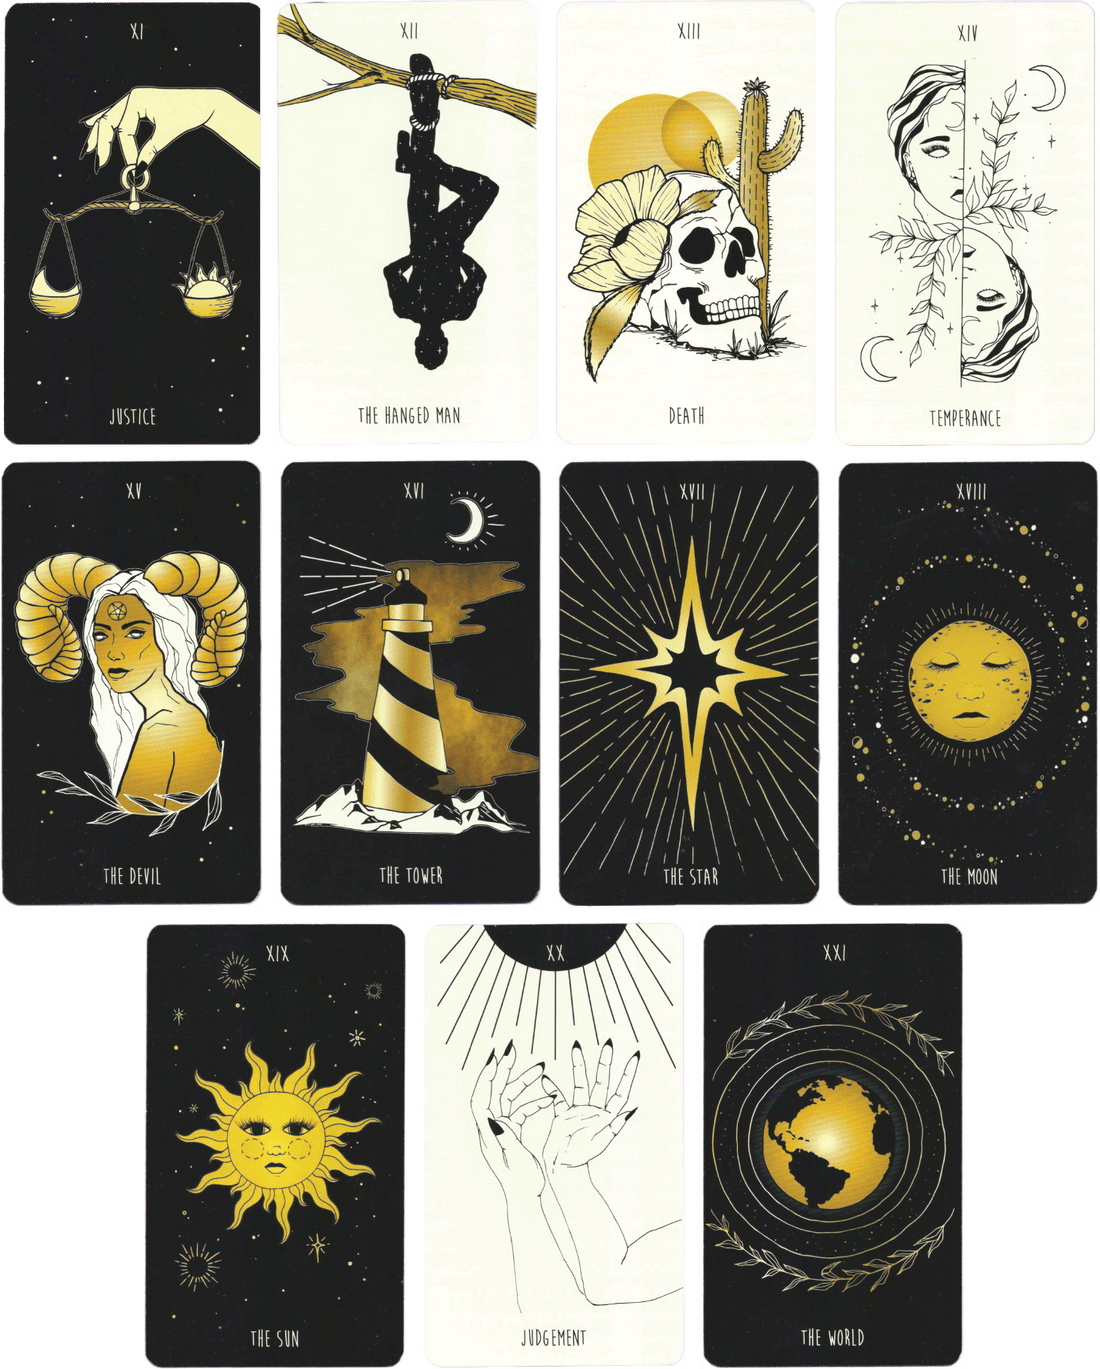 new moon tarot deck major arcana cards by Mélina Lamoureux (MeliThelover). Cards from eleven to twenty one of major arcana of new moon tarot deck